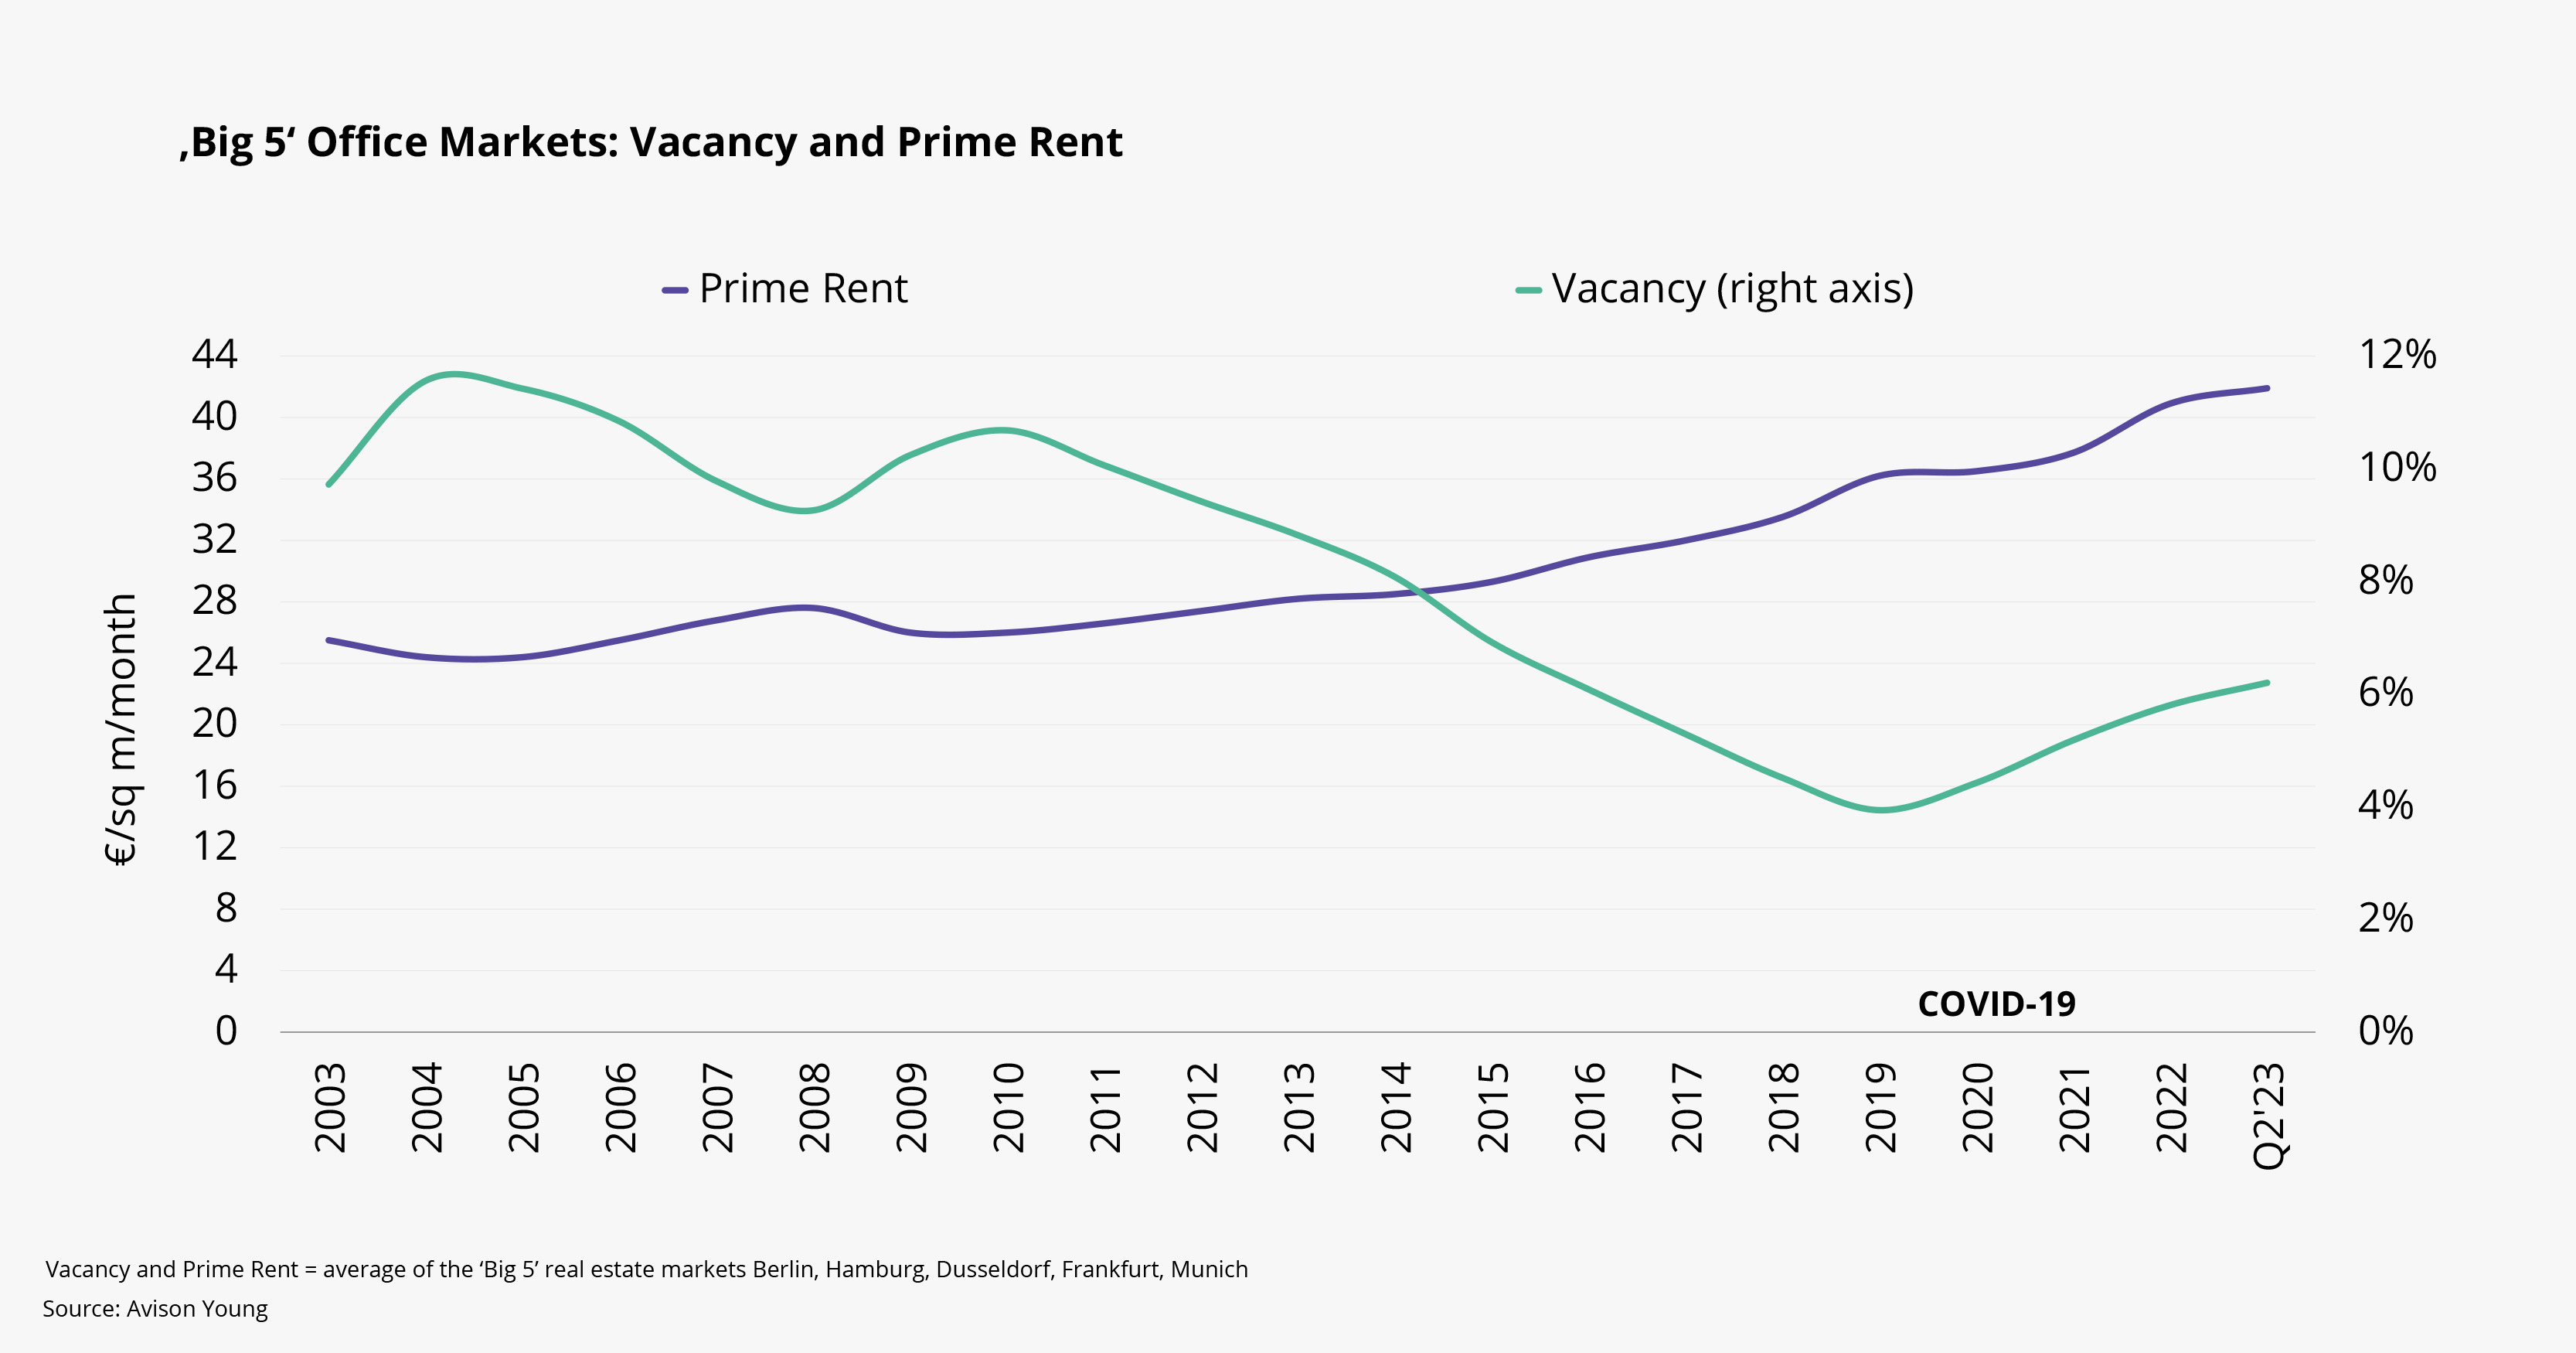 Big 5 Office Markets: Vacancy and Prime Rent